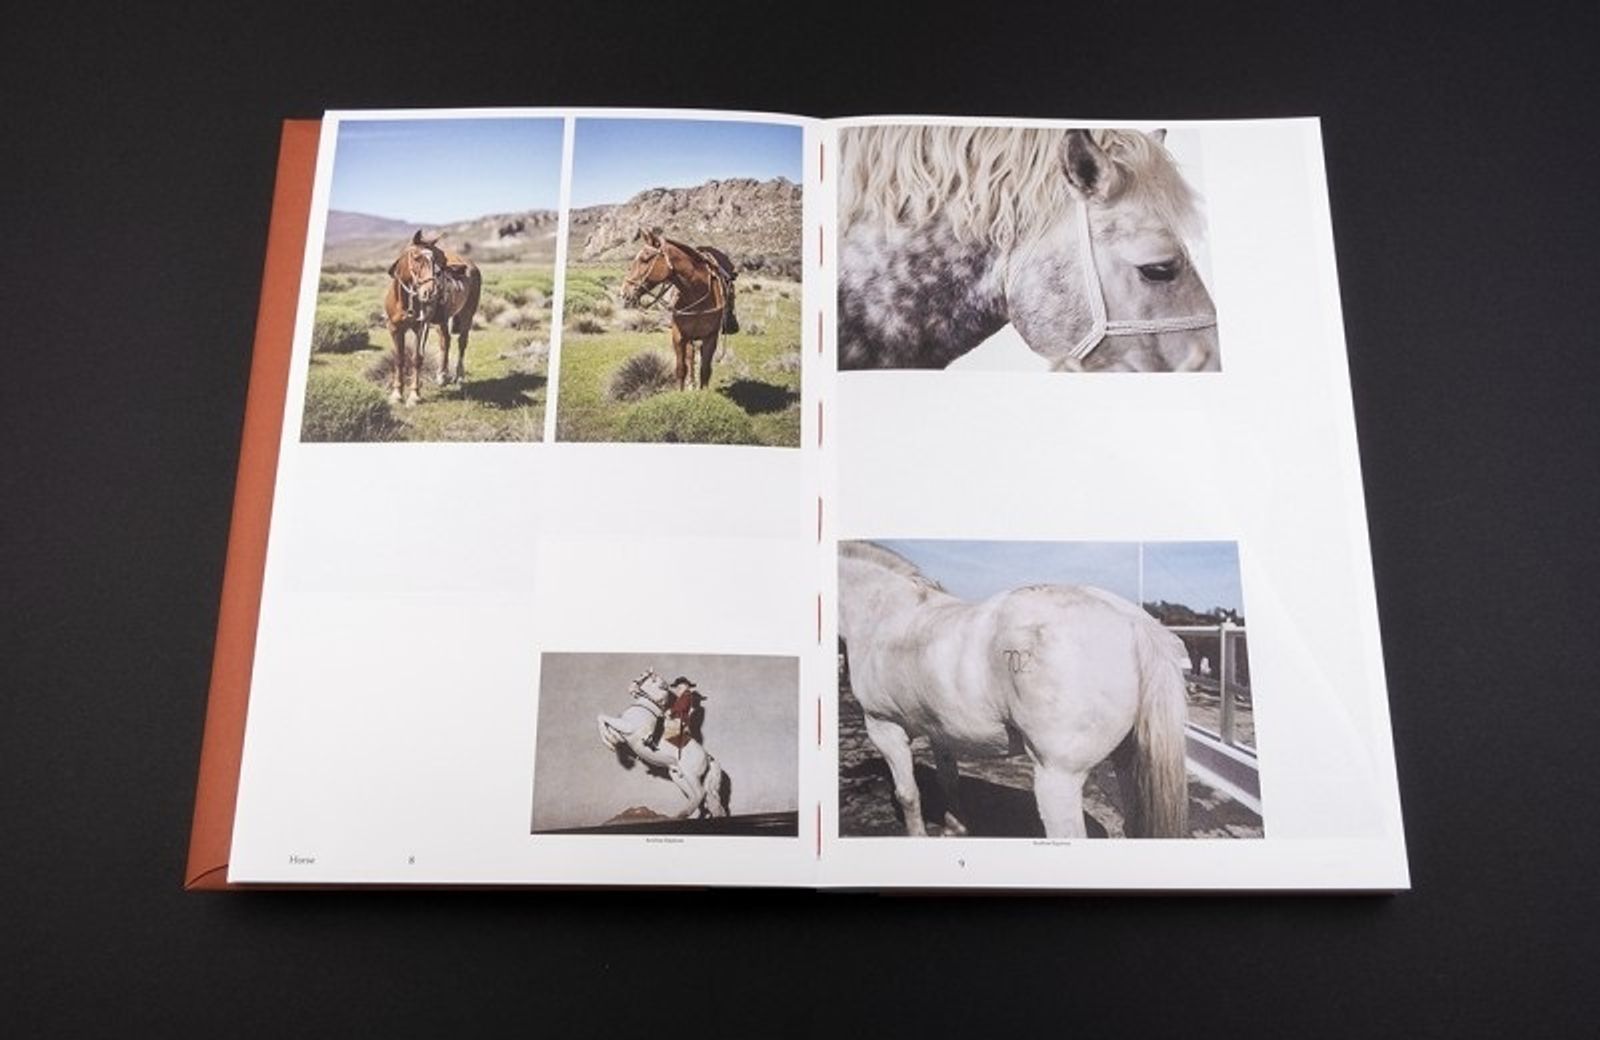 © Heleen Peeters, spread from the book Horse